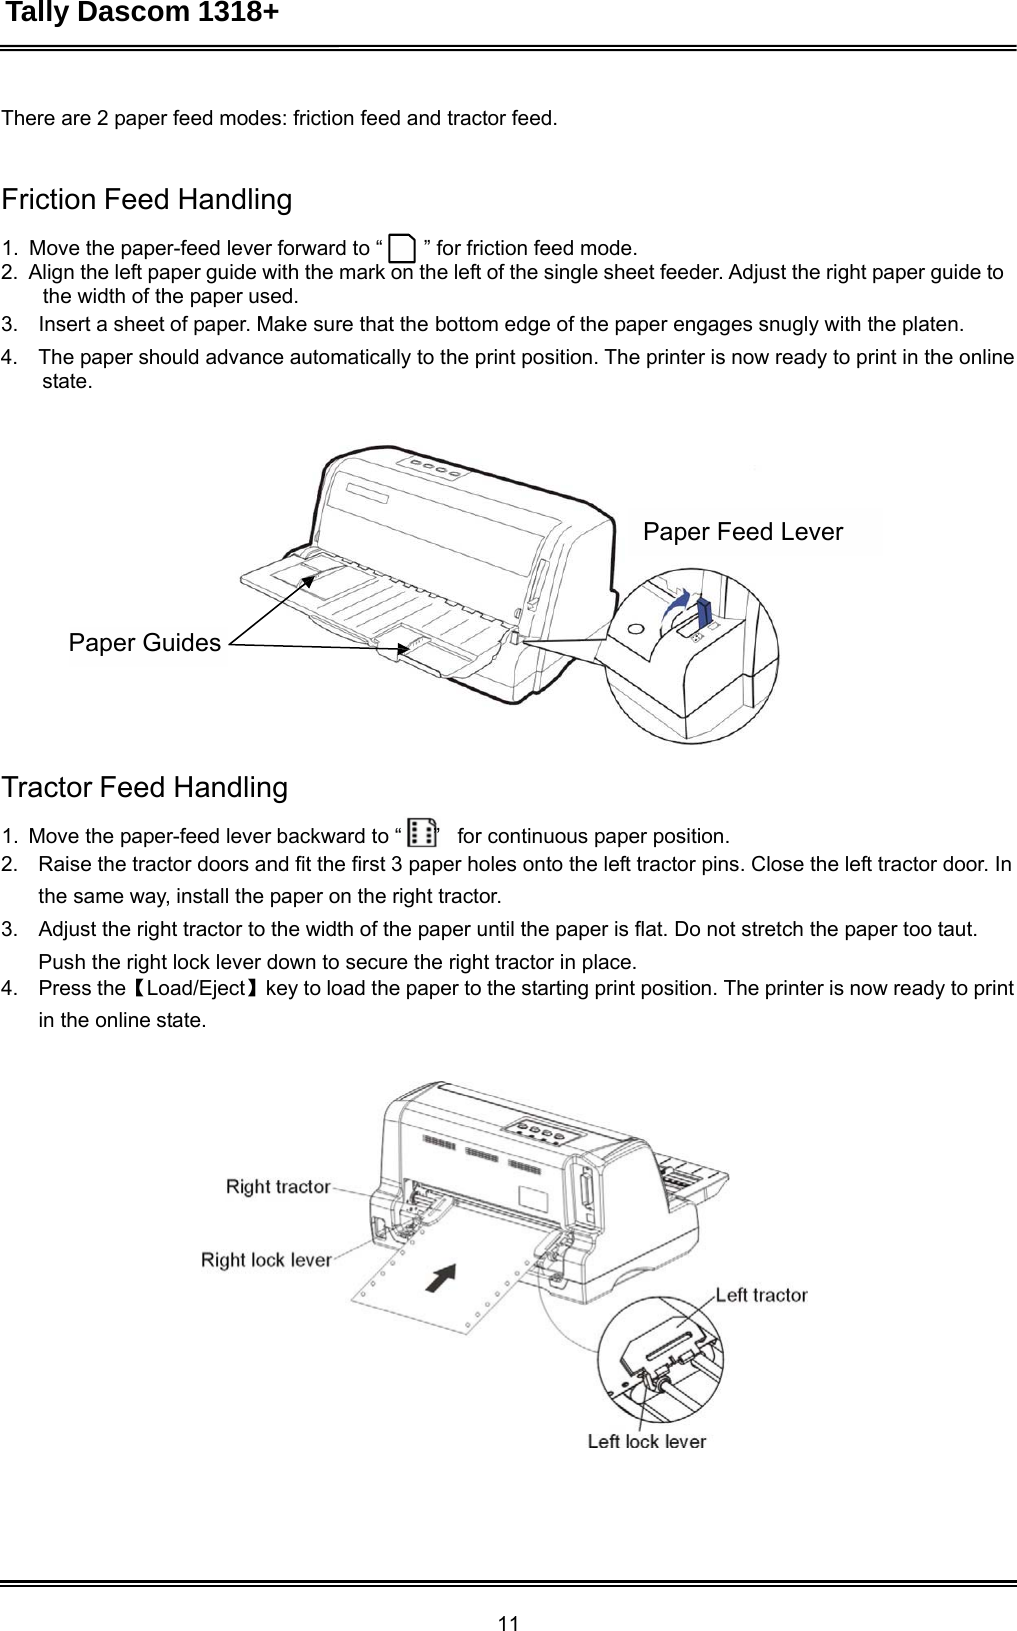 Tally Dascom 1318+ 11  There are 2 paper feed modes: friction feed and tractor feed.    Friction Feed Handling  1. Move the paper-feed lever forward to “ ” for friction feed mode. 2.  Align the left paper guide with the mark on the left of the single sheet feeder. Adjust the right paper guide to the width of the paper used.  3.    Insert a sheet of paper. Make sure that the bottom edge of the paper engages snugly with the platen. 4.    The paper should advance automatically to the print position. The printer is now ready to print in the online state.       Paper Feed Lever     Paper Guides       Tractor Feed Handling  1.  Move the paper-feed lever backward to “      ”   for continuous paper position. 2.    Raise the tractor doors and fit the first 3 paper holes onto the left tractor pins. Close the left tractor door. In the same way, install the paper on the right tractor. 3.    Adjust the right tractor to the width of the paper until the paper is flat. Do not stretch the paper too taut. Push the right lock lever down to secure the right tractor in place. 4.    Press the【Load/Eject】key to load the paper to the starting print position. The printer is now ready to print in the online state.    